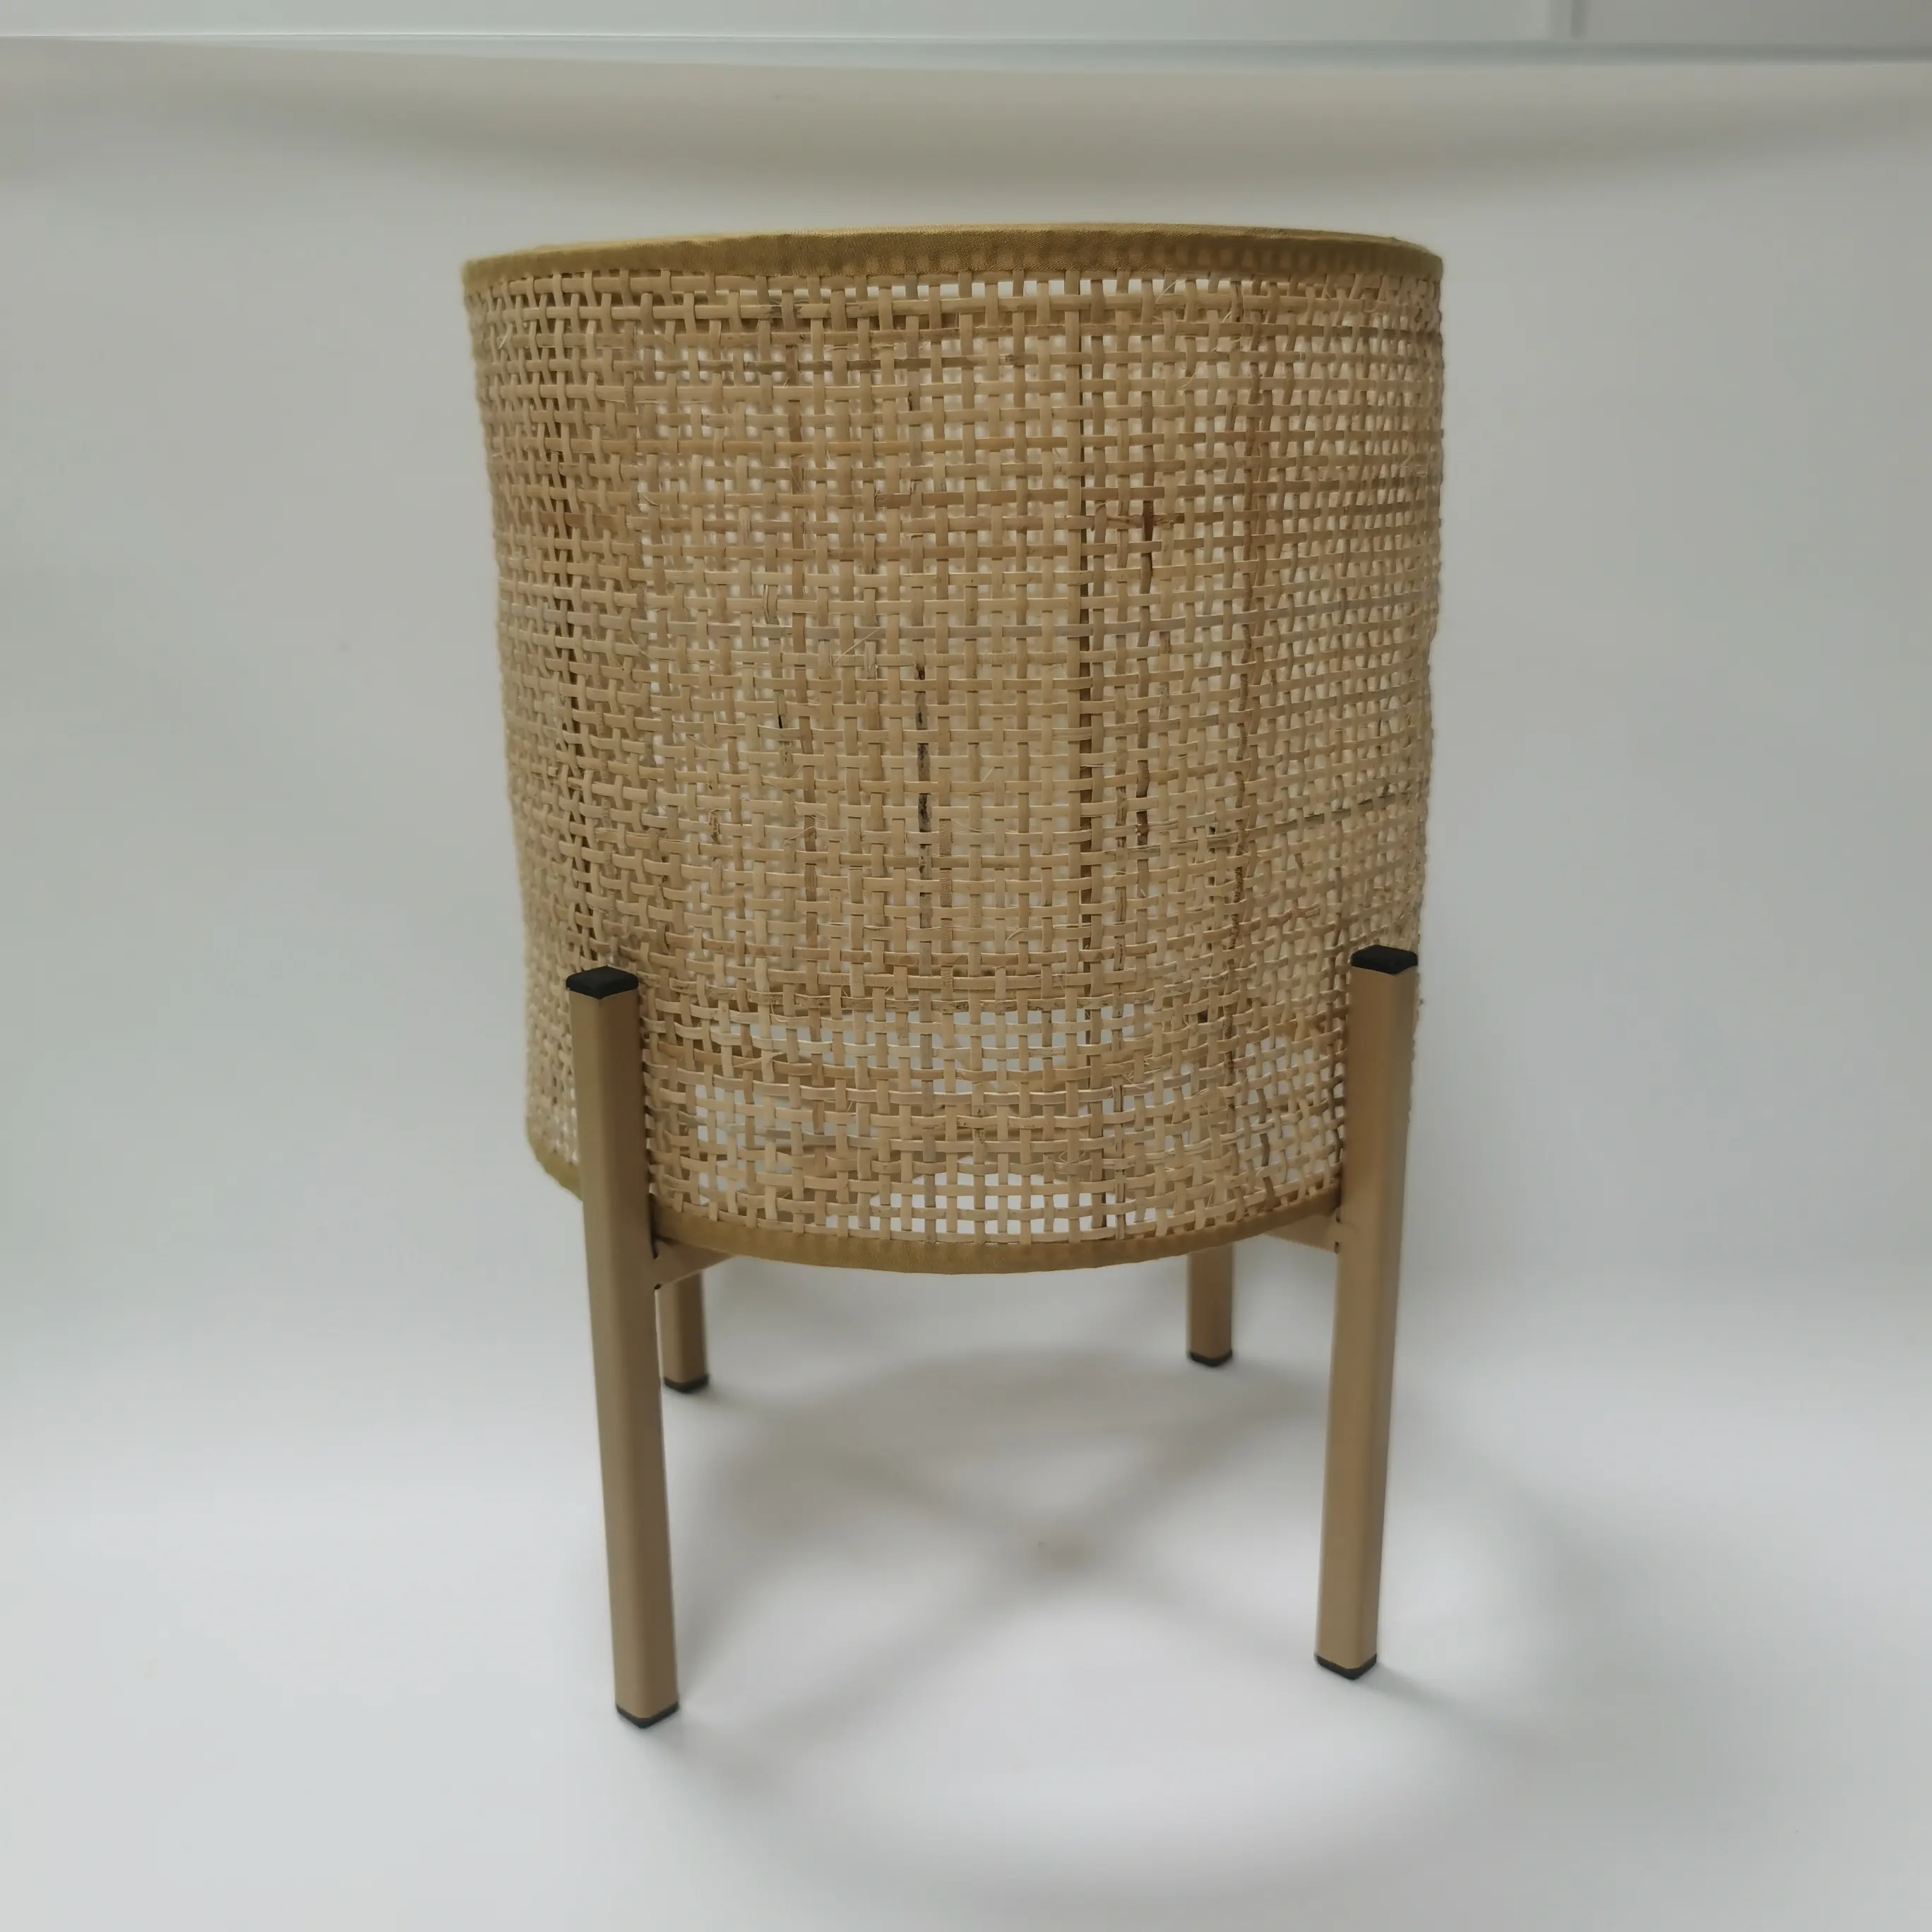 Wholesale sea grass planter with leg made in China Vintage rattan wicker plant stand Modern design woven wicker flower pots